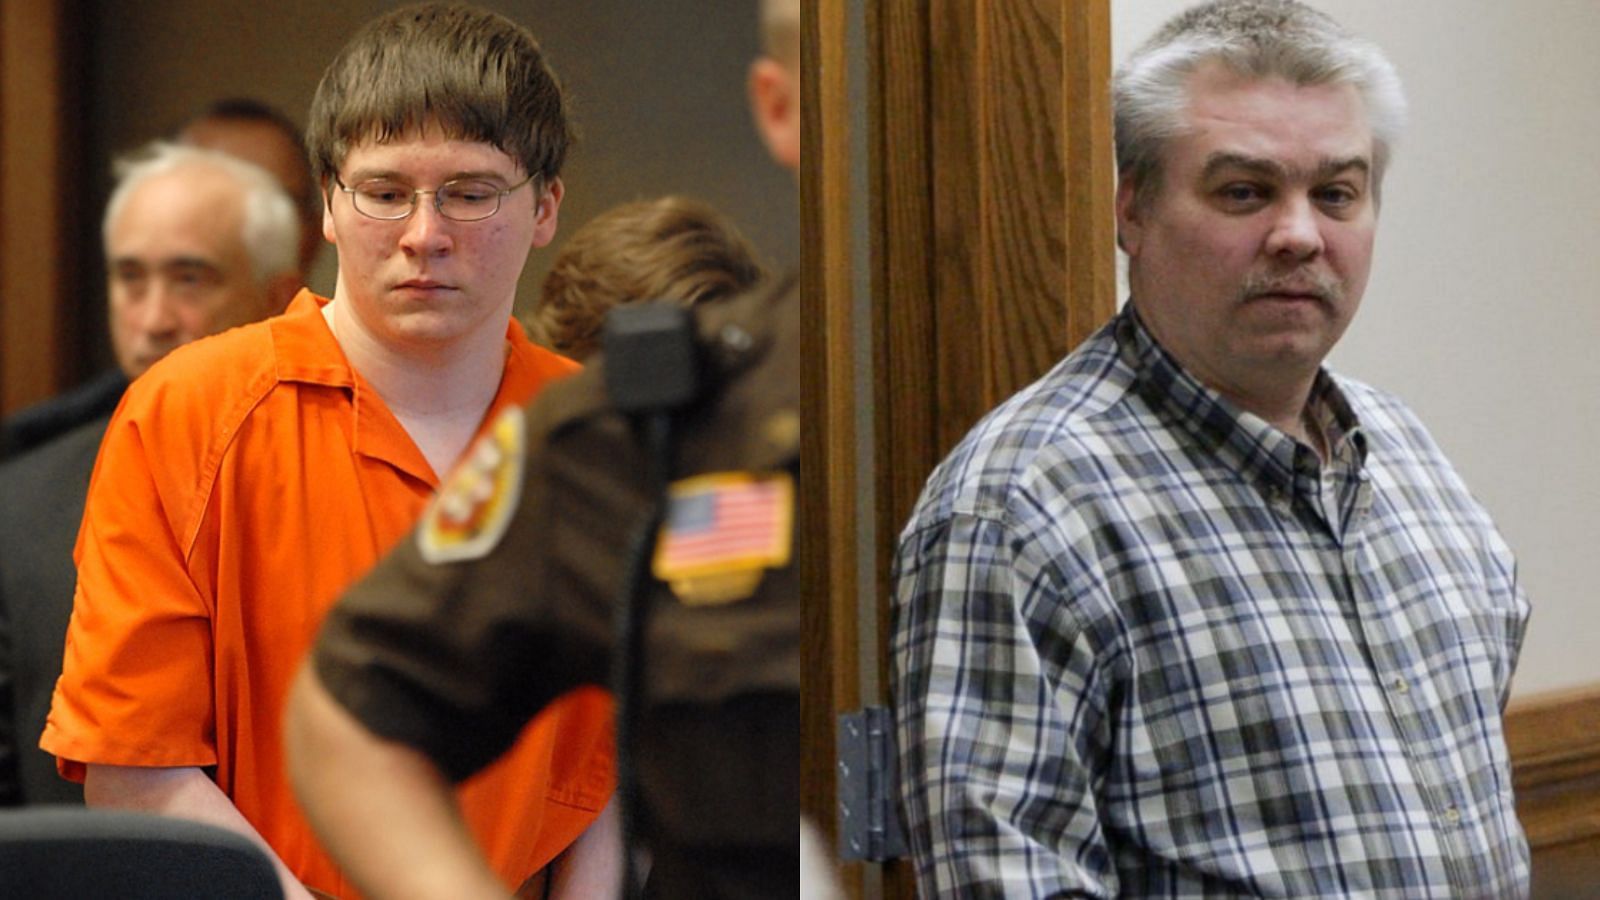 Brendan Dassey and Stephen Avery (Images via Oxygen))